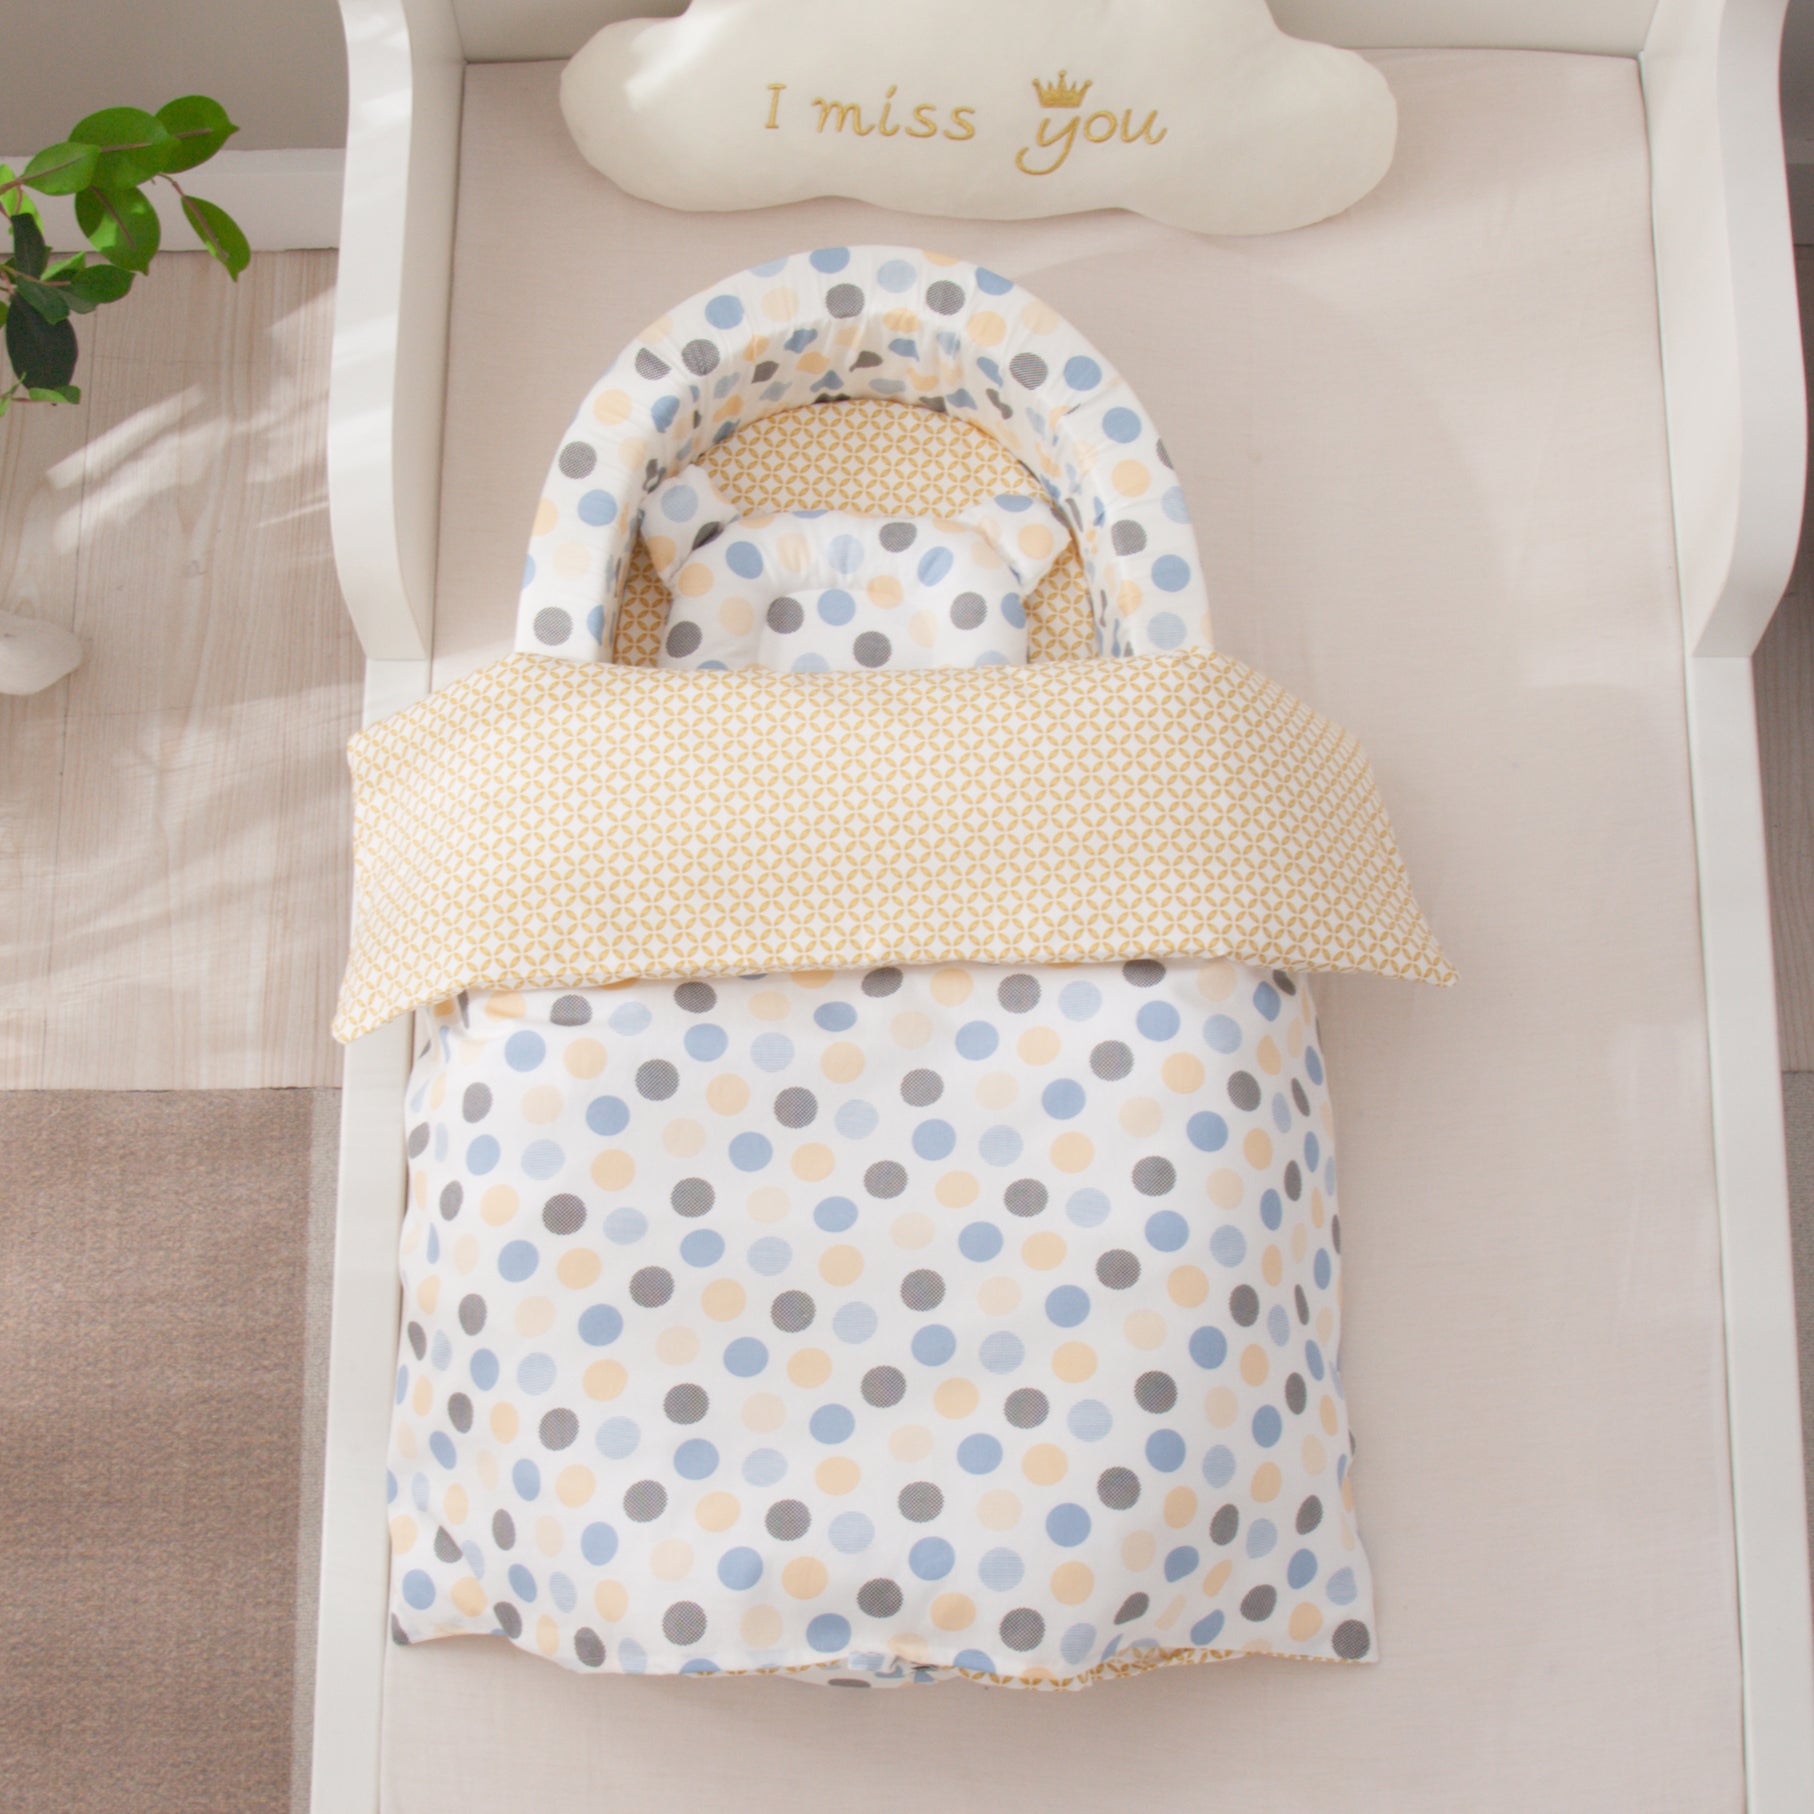 3-piece Baby Nest with Blanket & Pillow